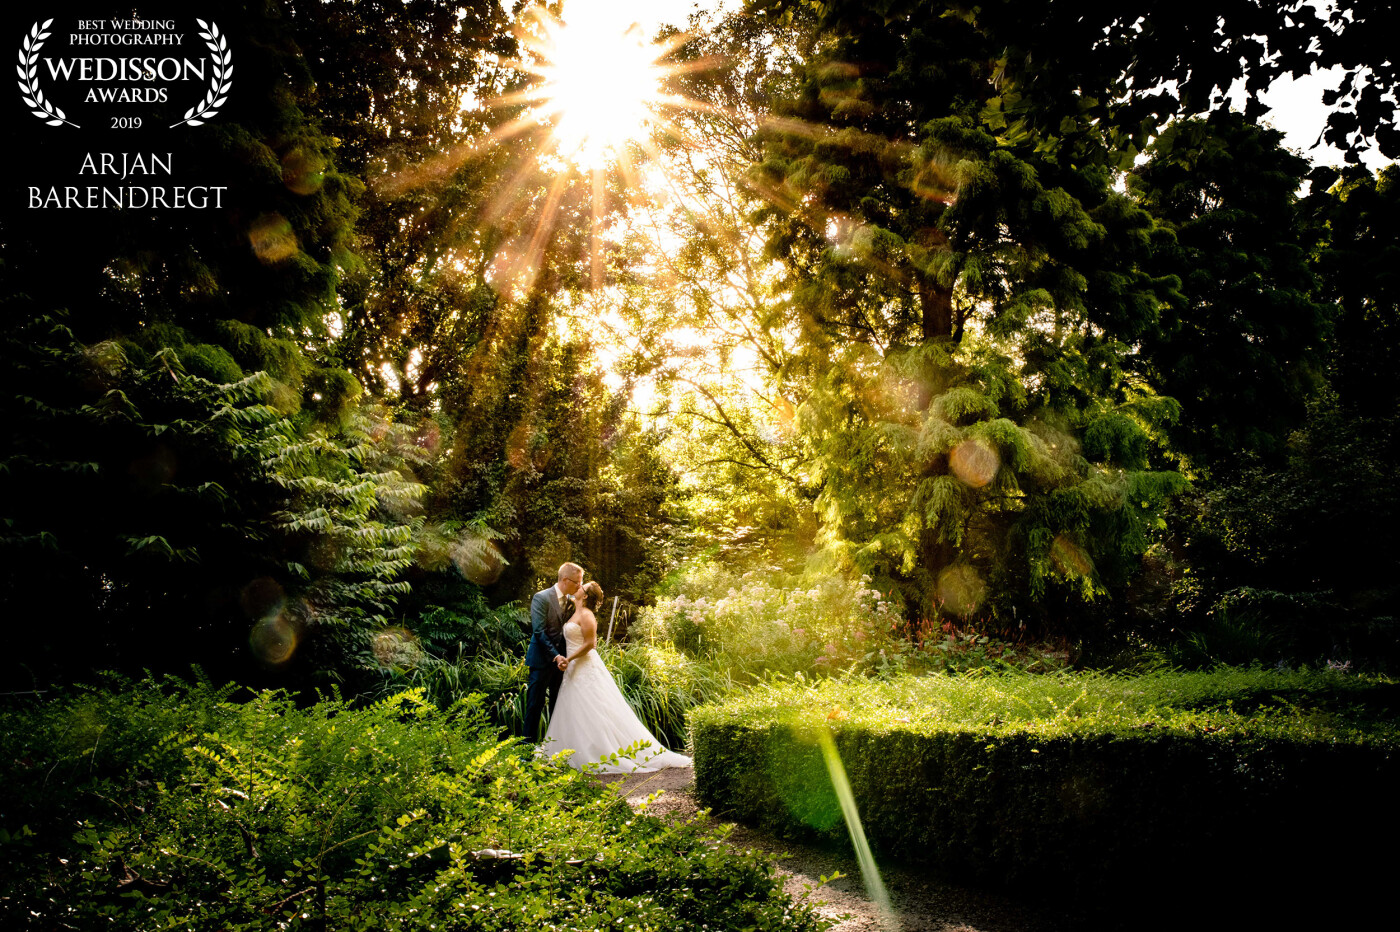 This wedding was last August. We start the shoot in the morning before the sun was at her highest point. <br />
For me, it was a really lucky moment that the sun just came up behind the trees. The only question to this lovely couple was to let me see that they love each other. 